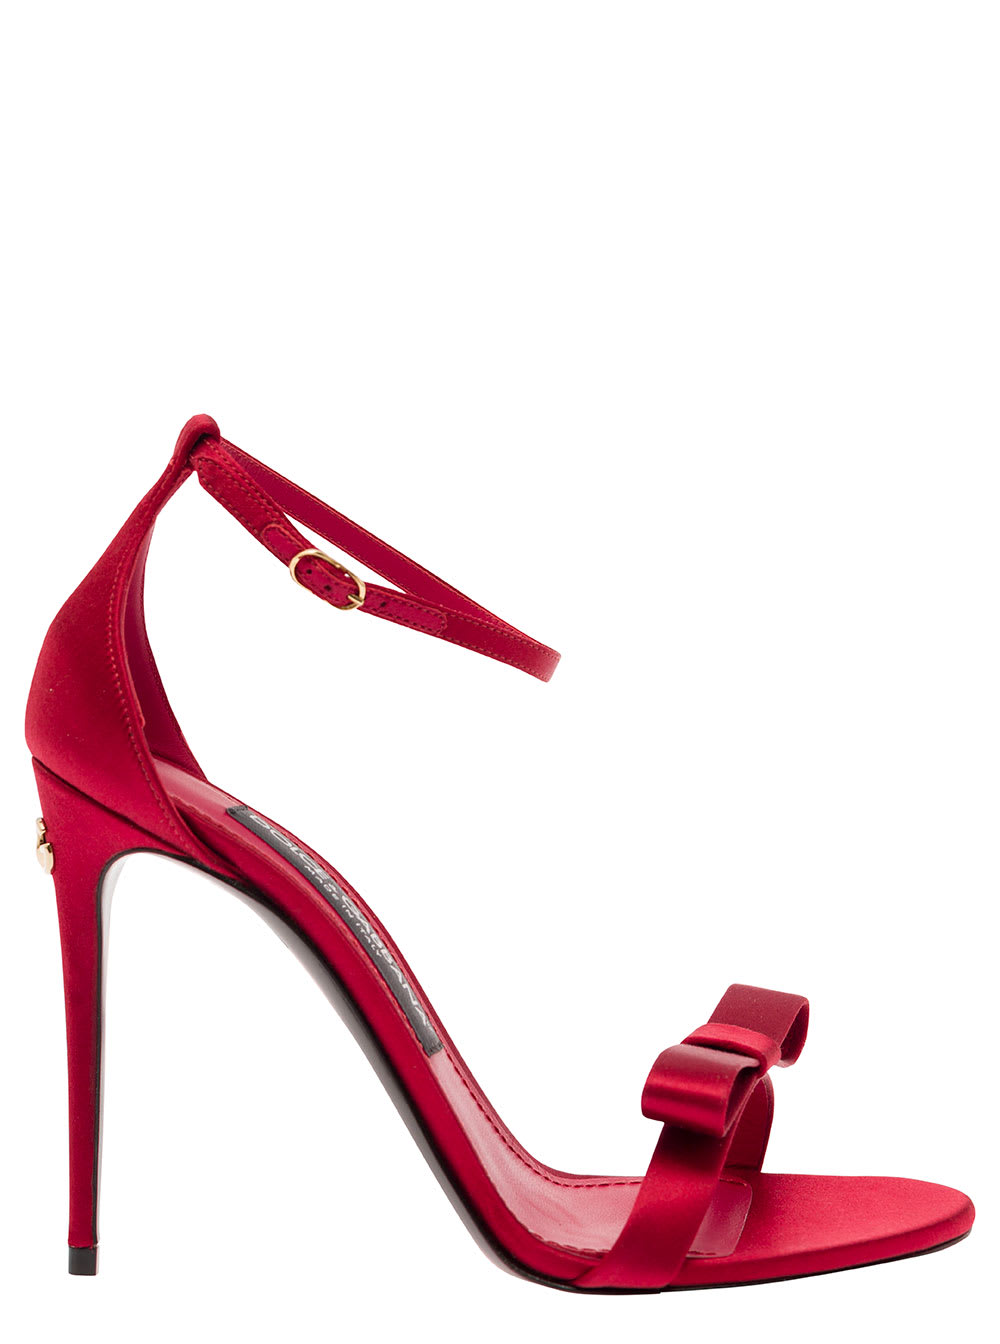 DOLCE & GABBANA RED SANDALS WITH BOW AND LOGO DETAIL IN SATIN WOMAN